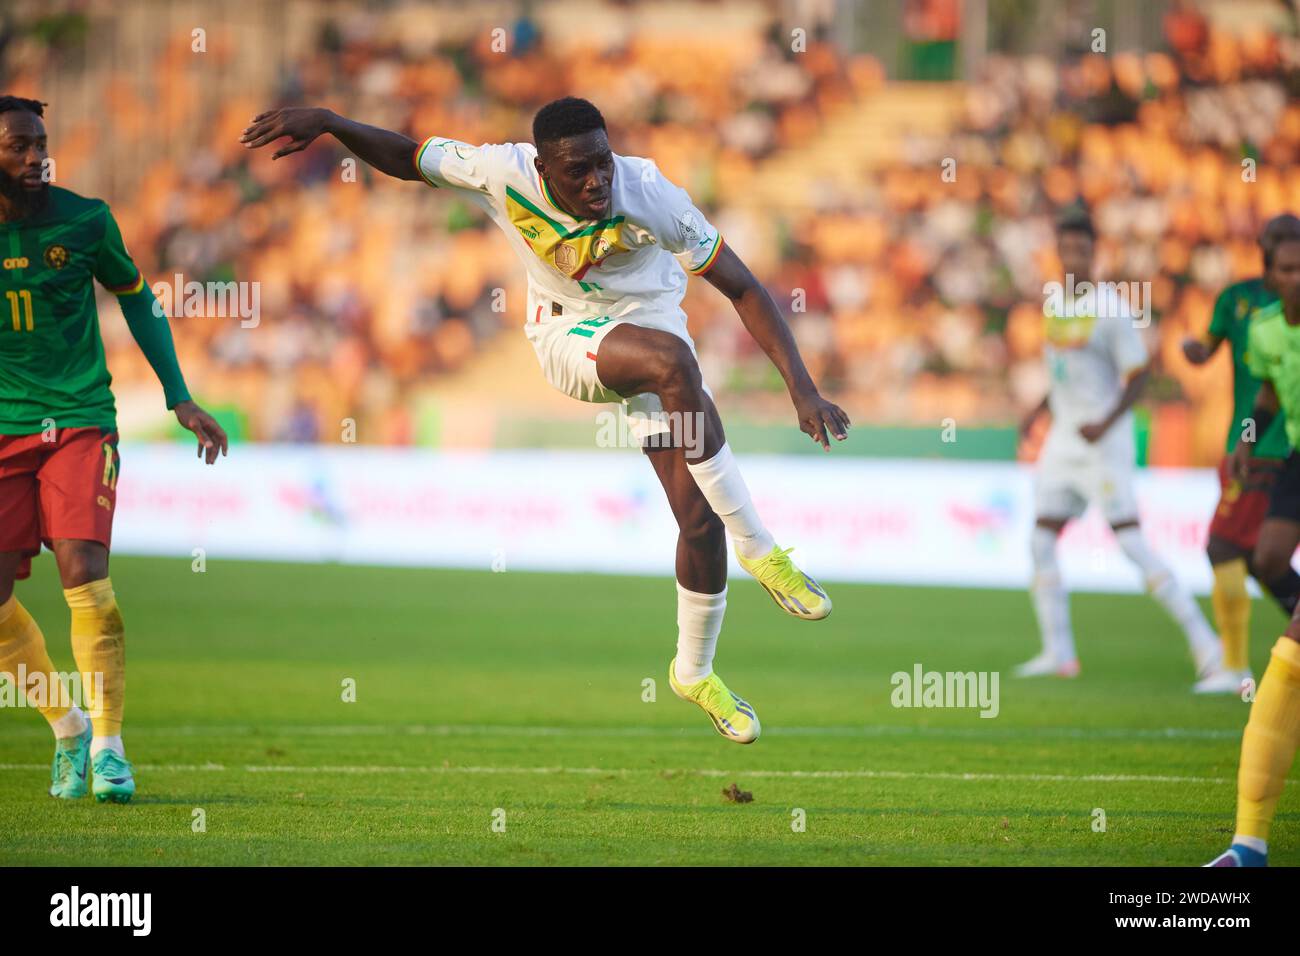 Highlights of the match between Senegal and Cameroon at the Africa Cup of Nations 2023, Ismaïla Sarr unleashing a powerful strike Stock Photo